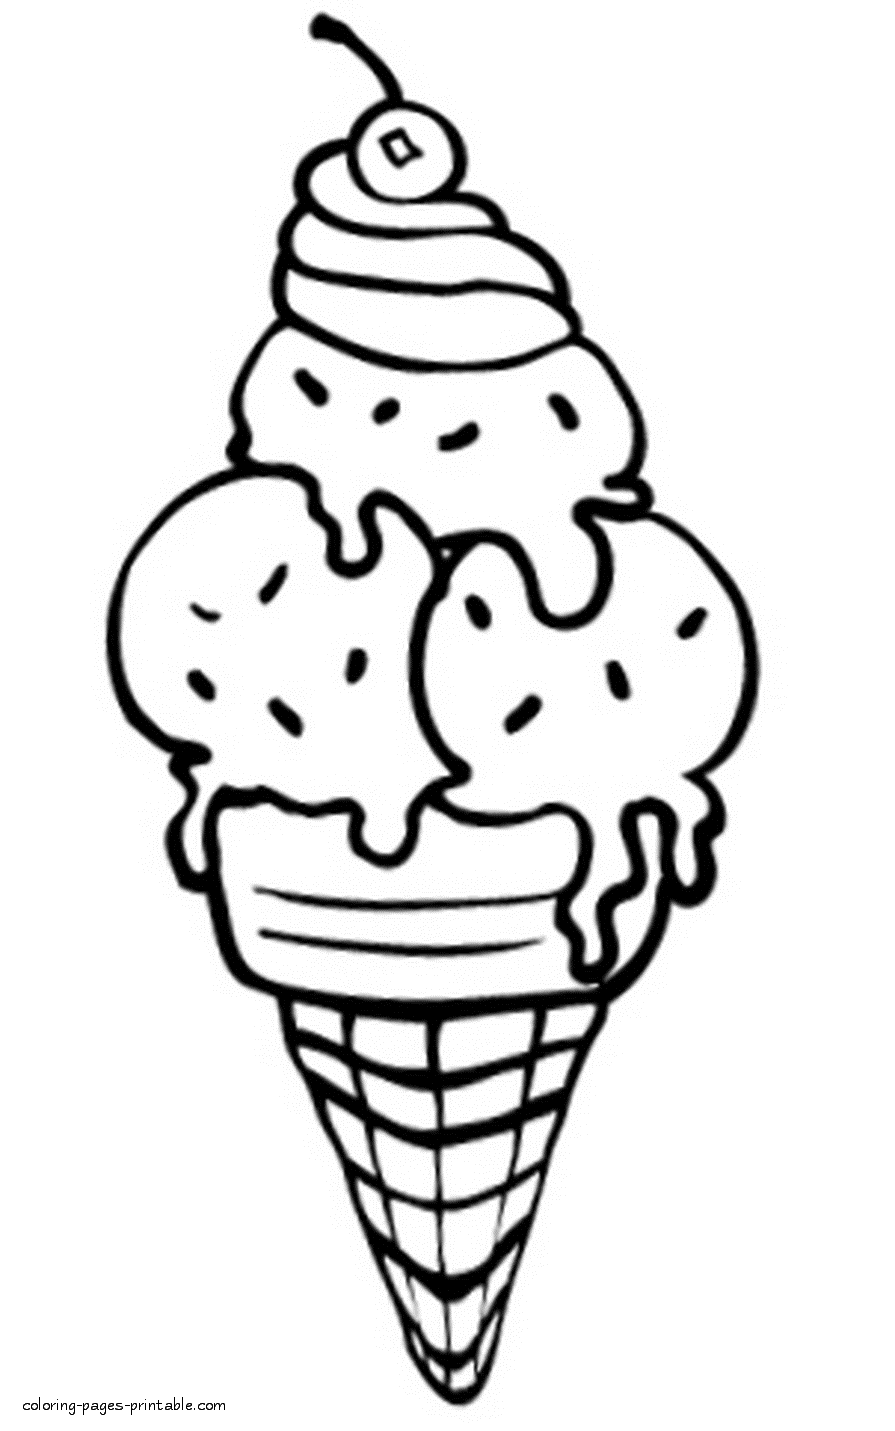 Ice Cream Coloring Sheets, Buy Now, Online, 20 OFF, www ...